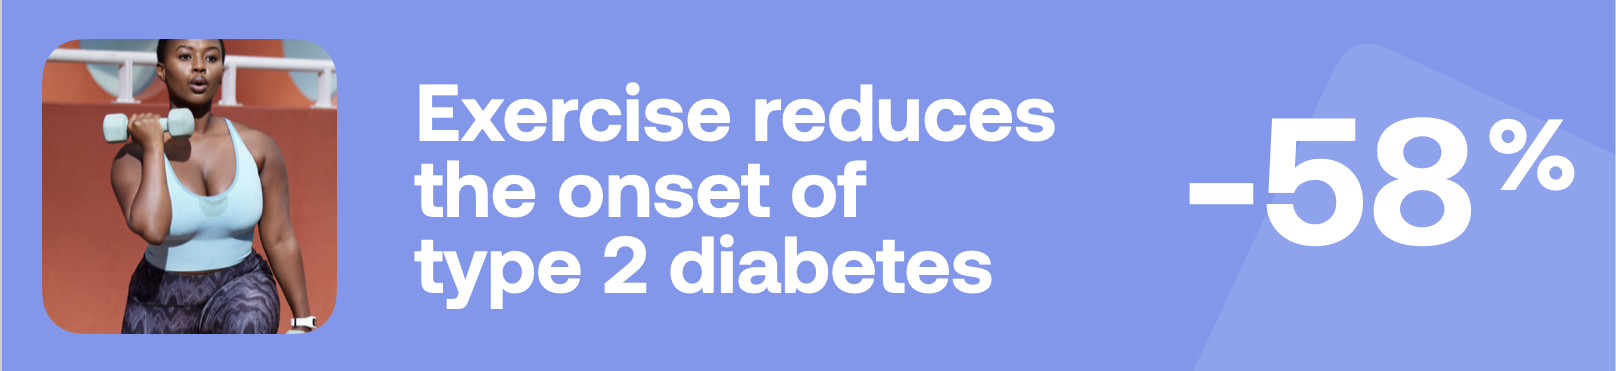 Exercise reduces the onset of type 2 diabetes -58%